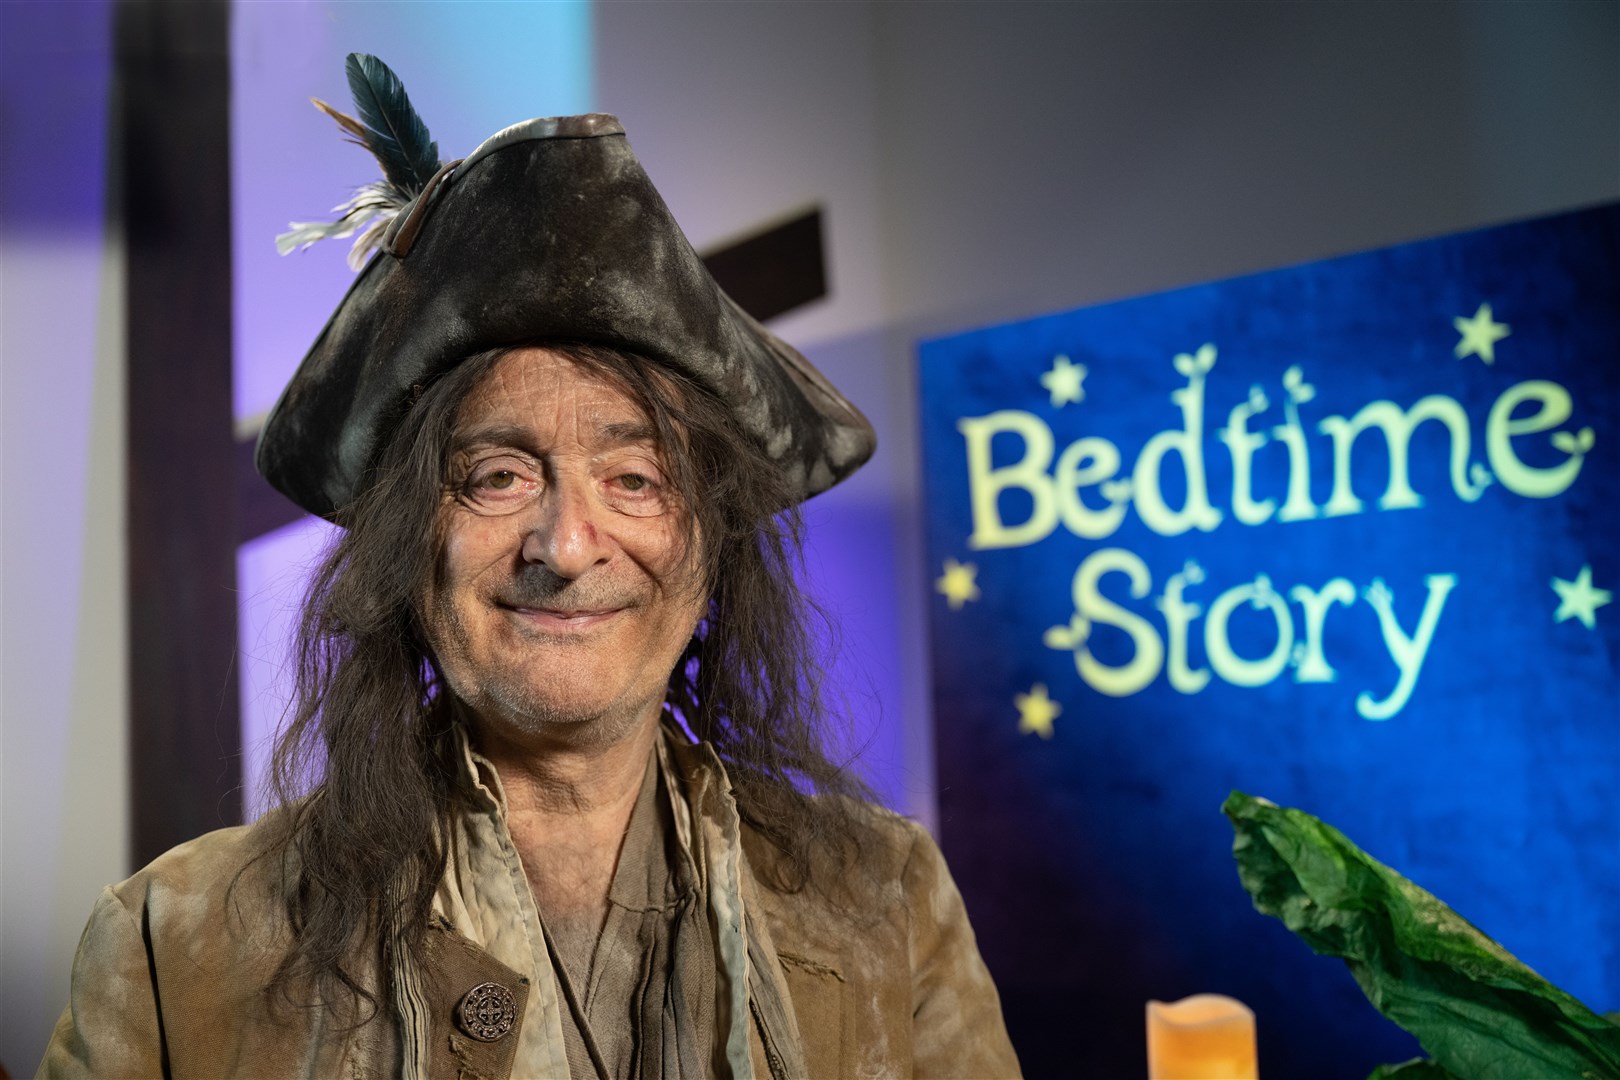 Sir Tony Robinson returned as the character of Baldrick to read a bedtime story during Friday night’s Comic Relief show (BBC/Comic Relief/PA)